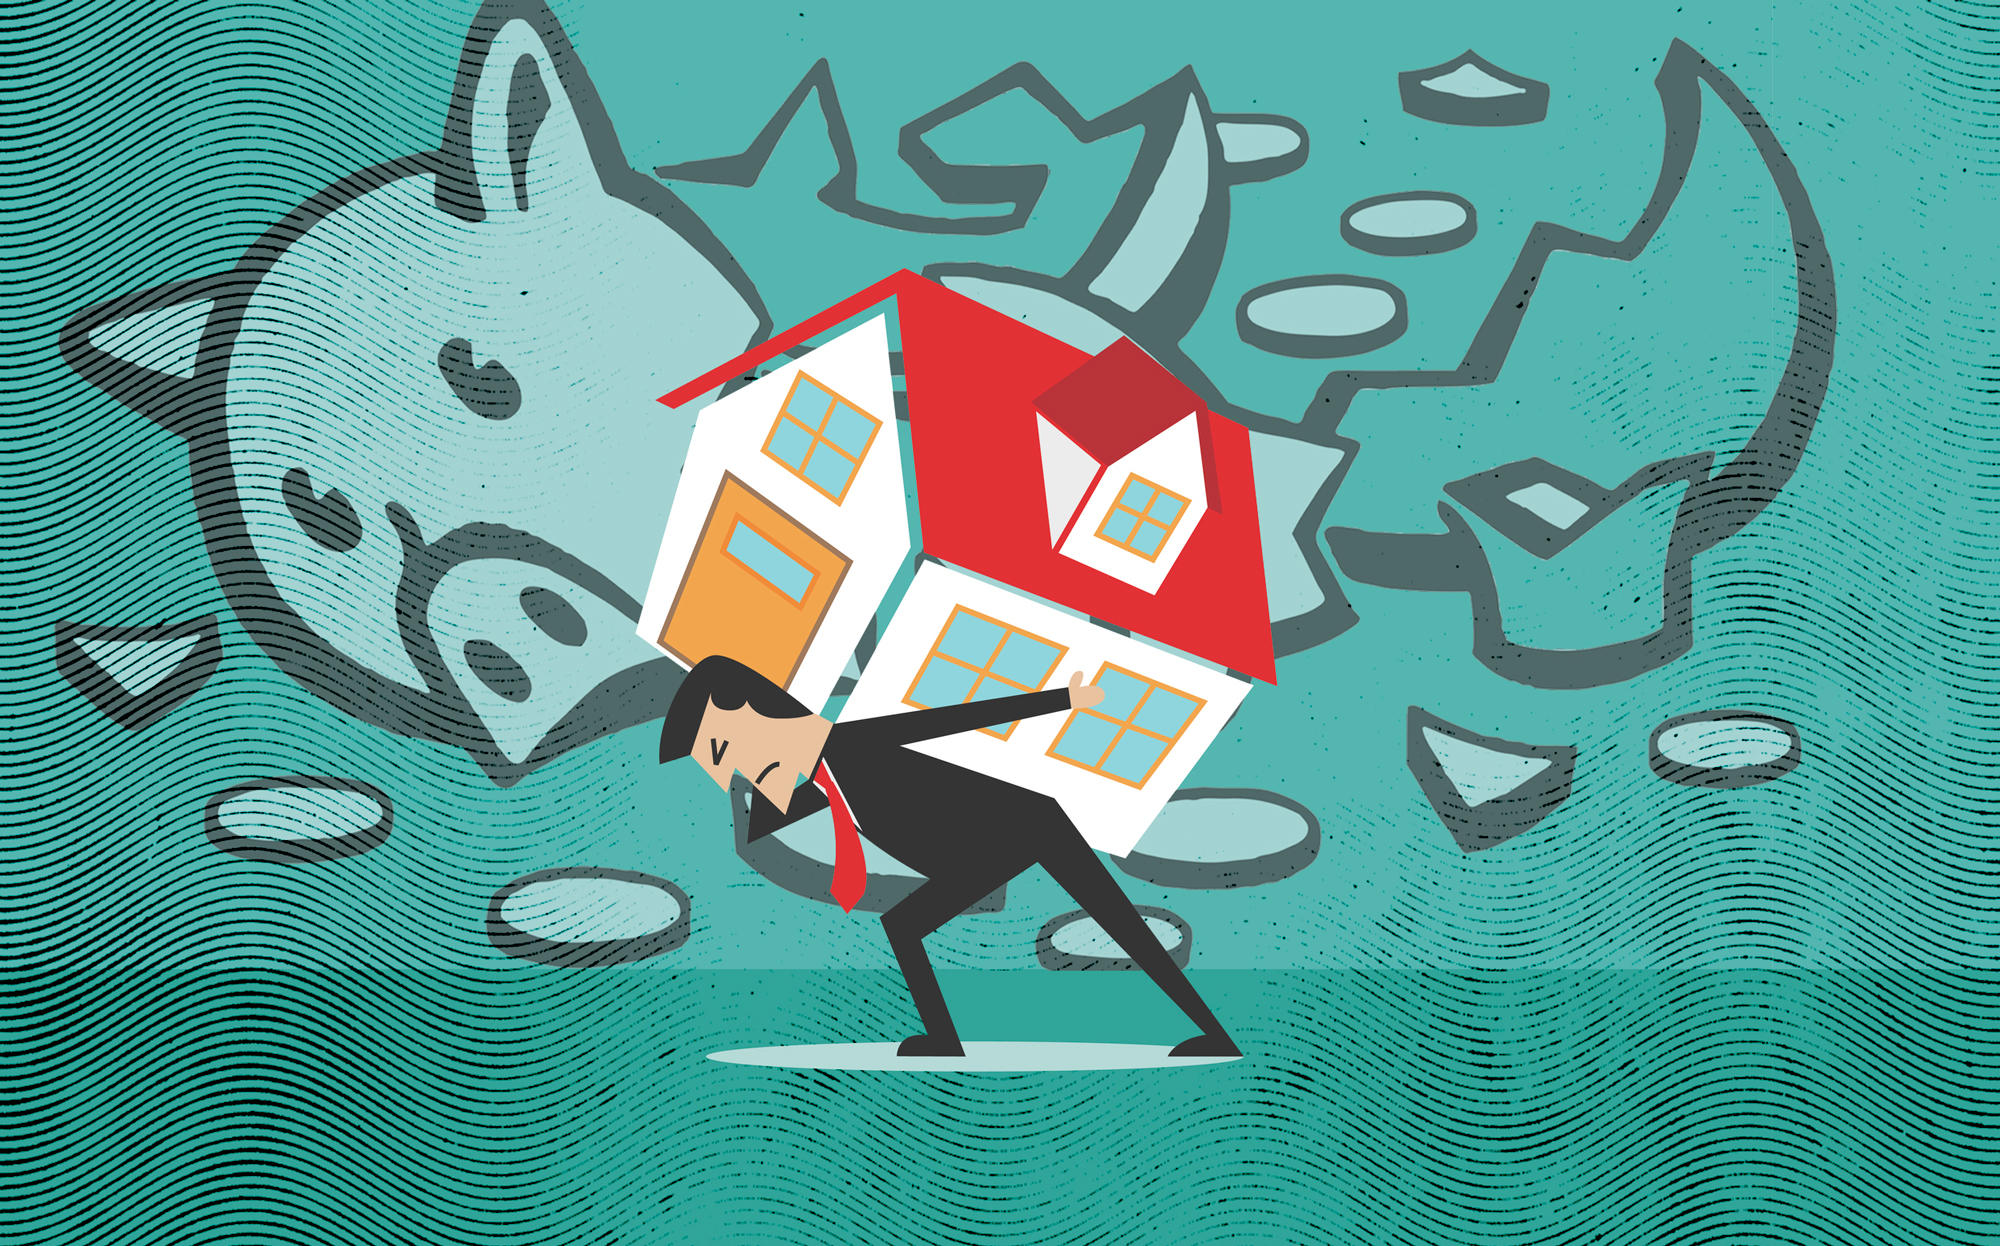 Homeowners are halting mortgage payments as forbearance rates surge. (Credit: iStock)